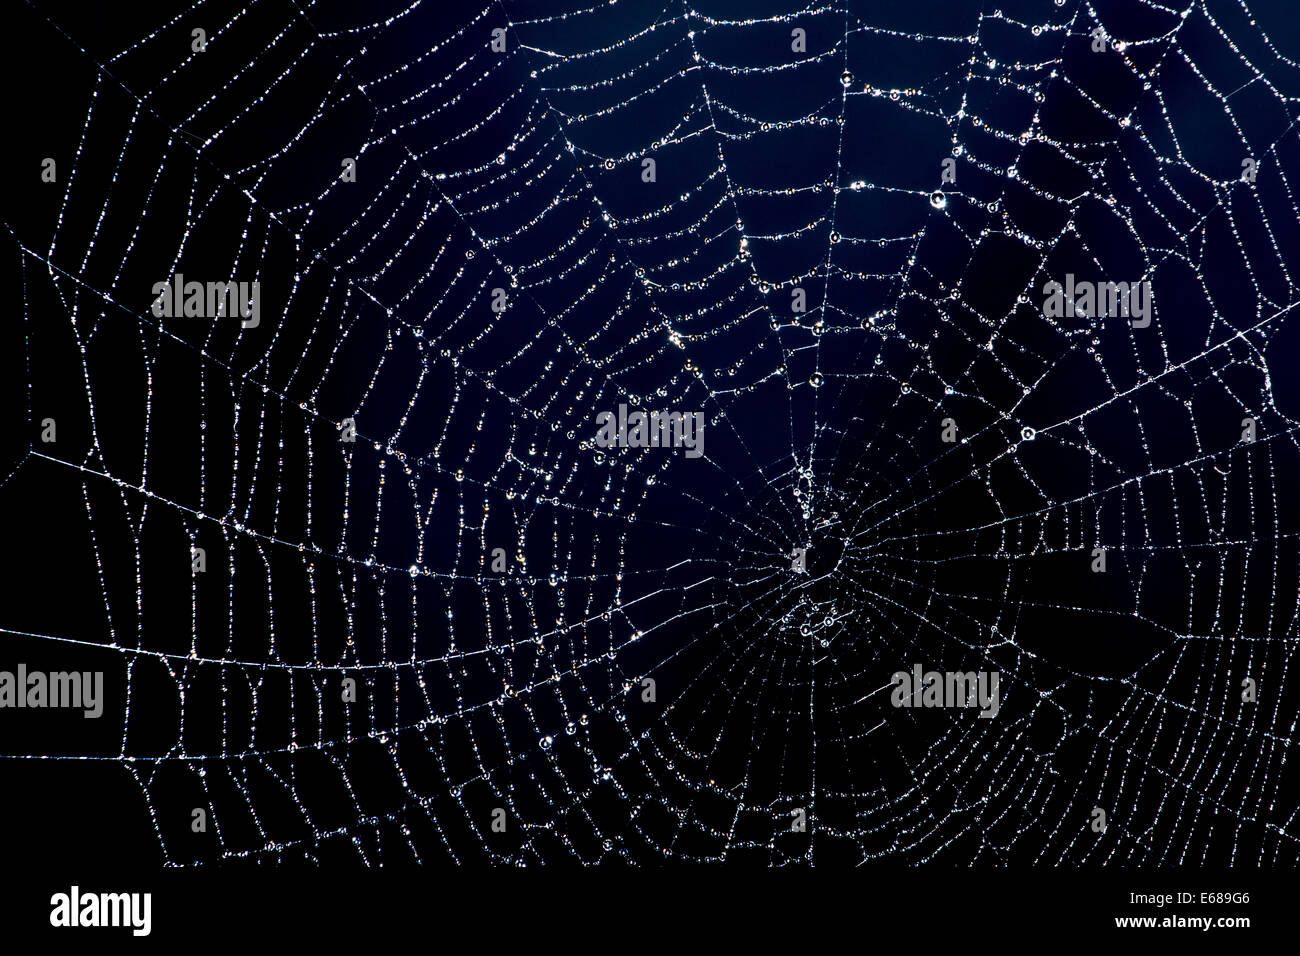 spider web with dew droplets Stock Photo